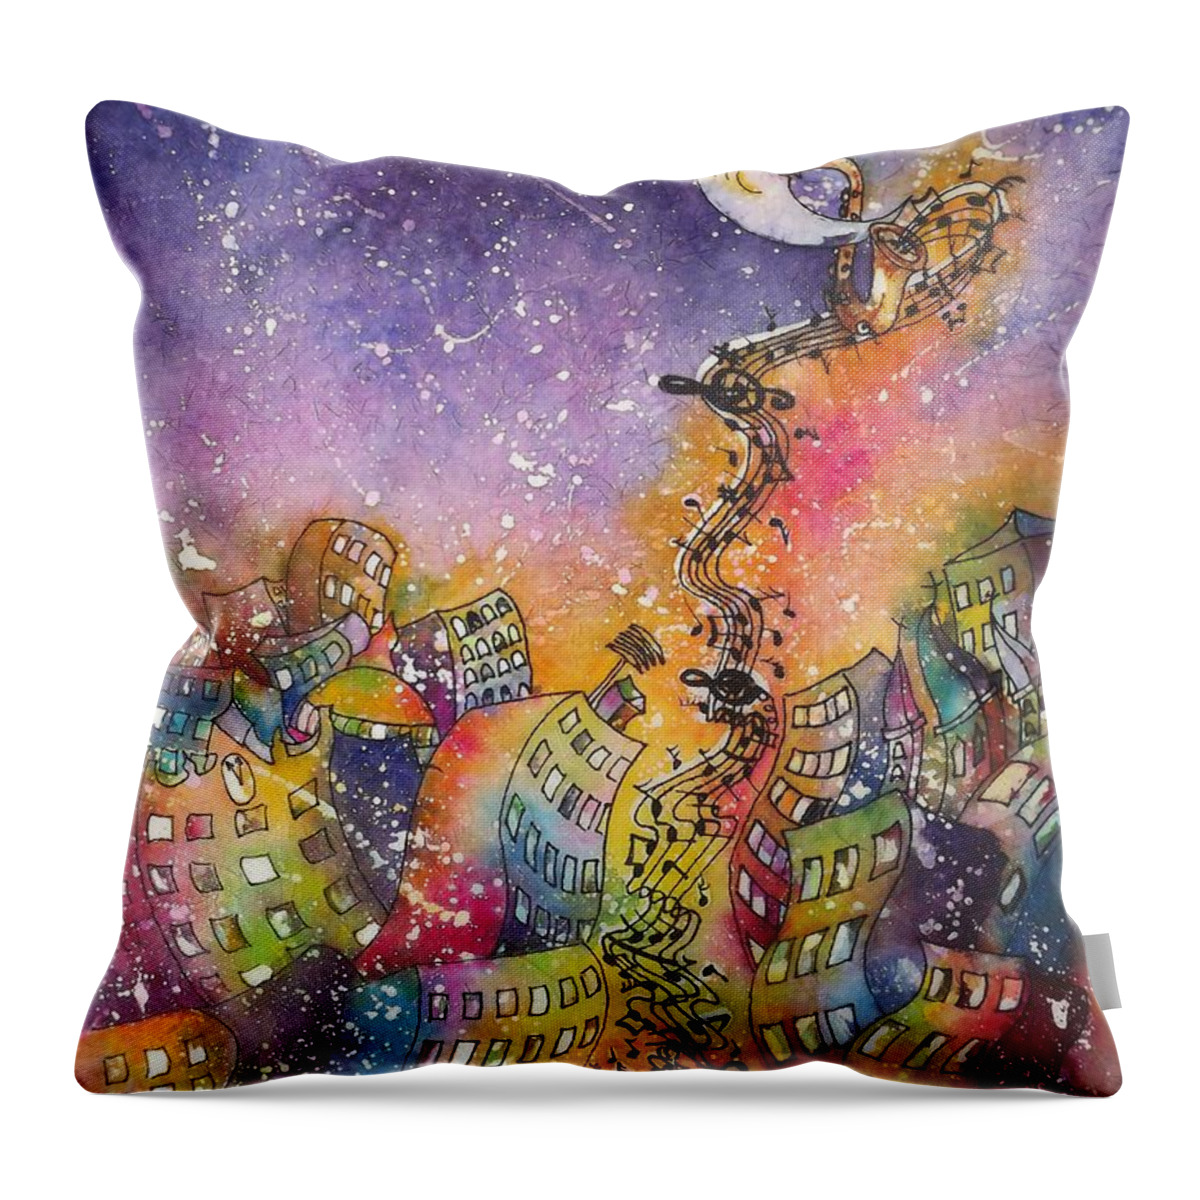  Magical Throw Pillow featuring the painting Street Dance by Carol Losinski Naylor